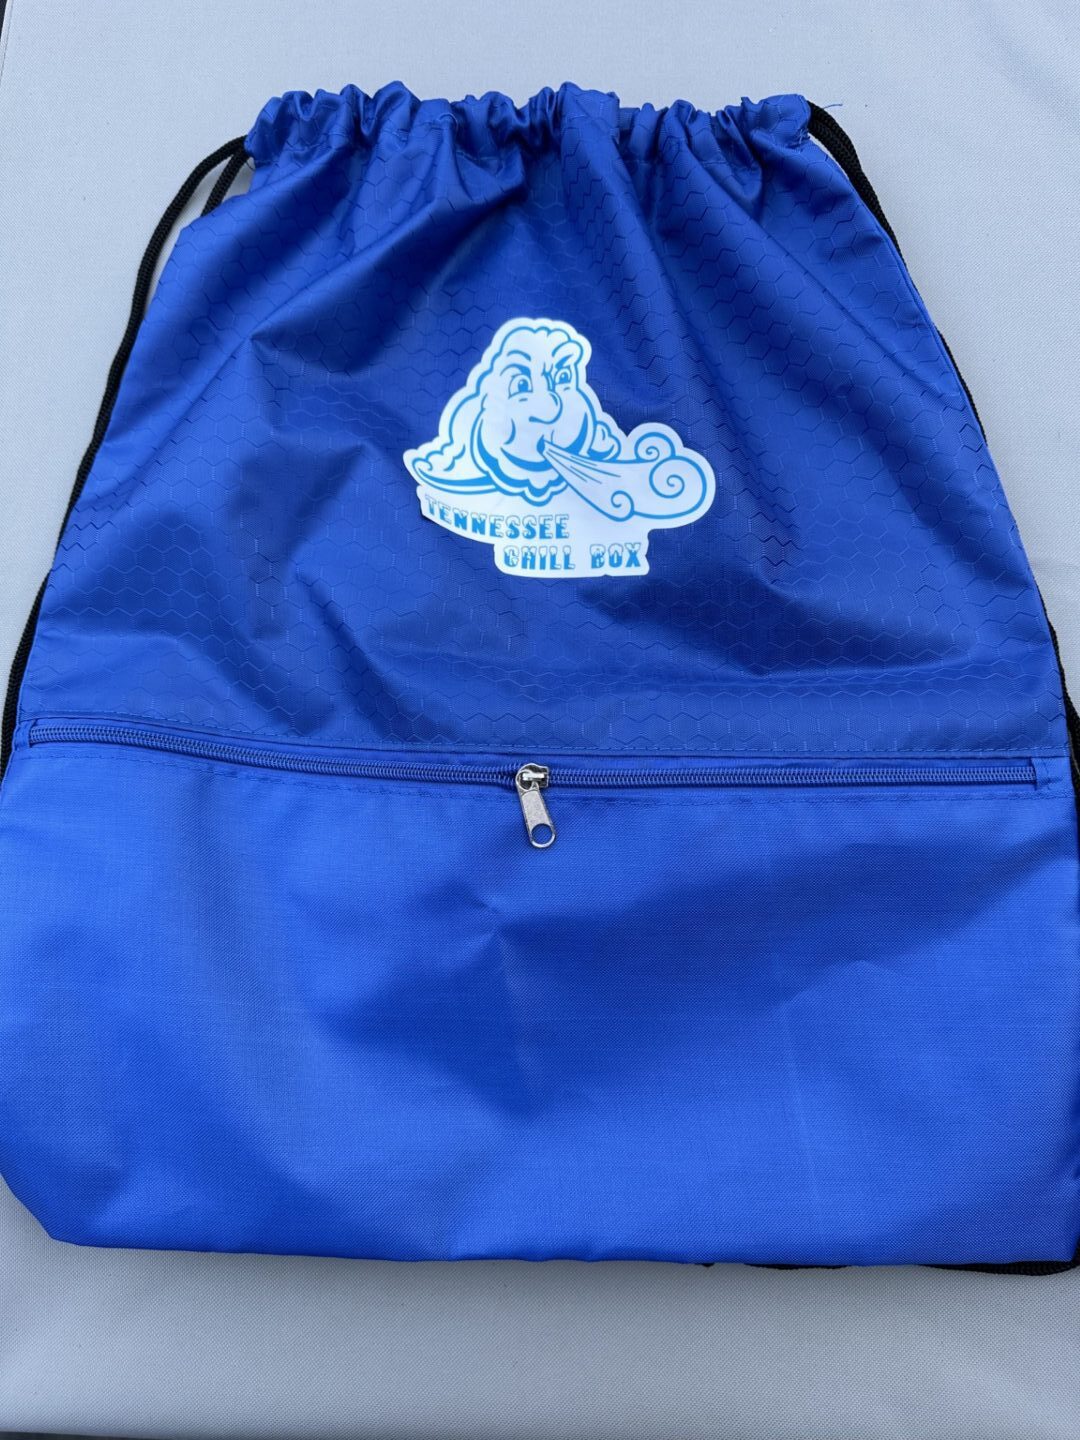 A blue color bag on a white background